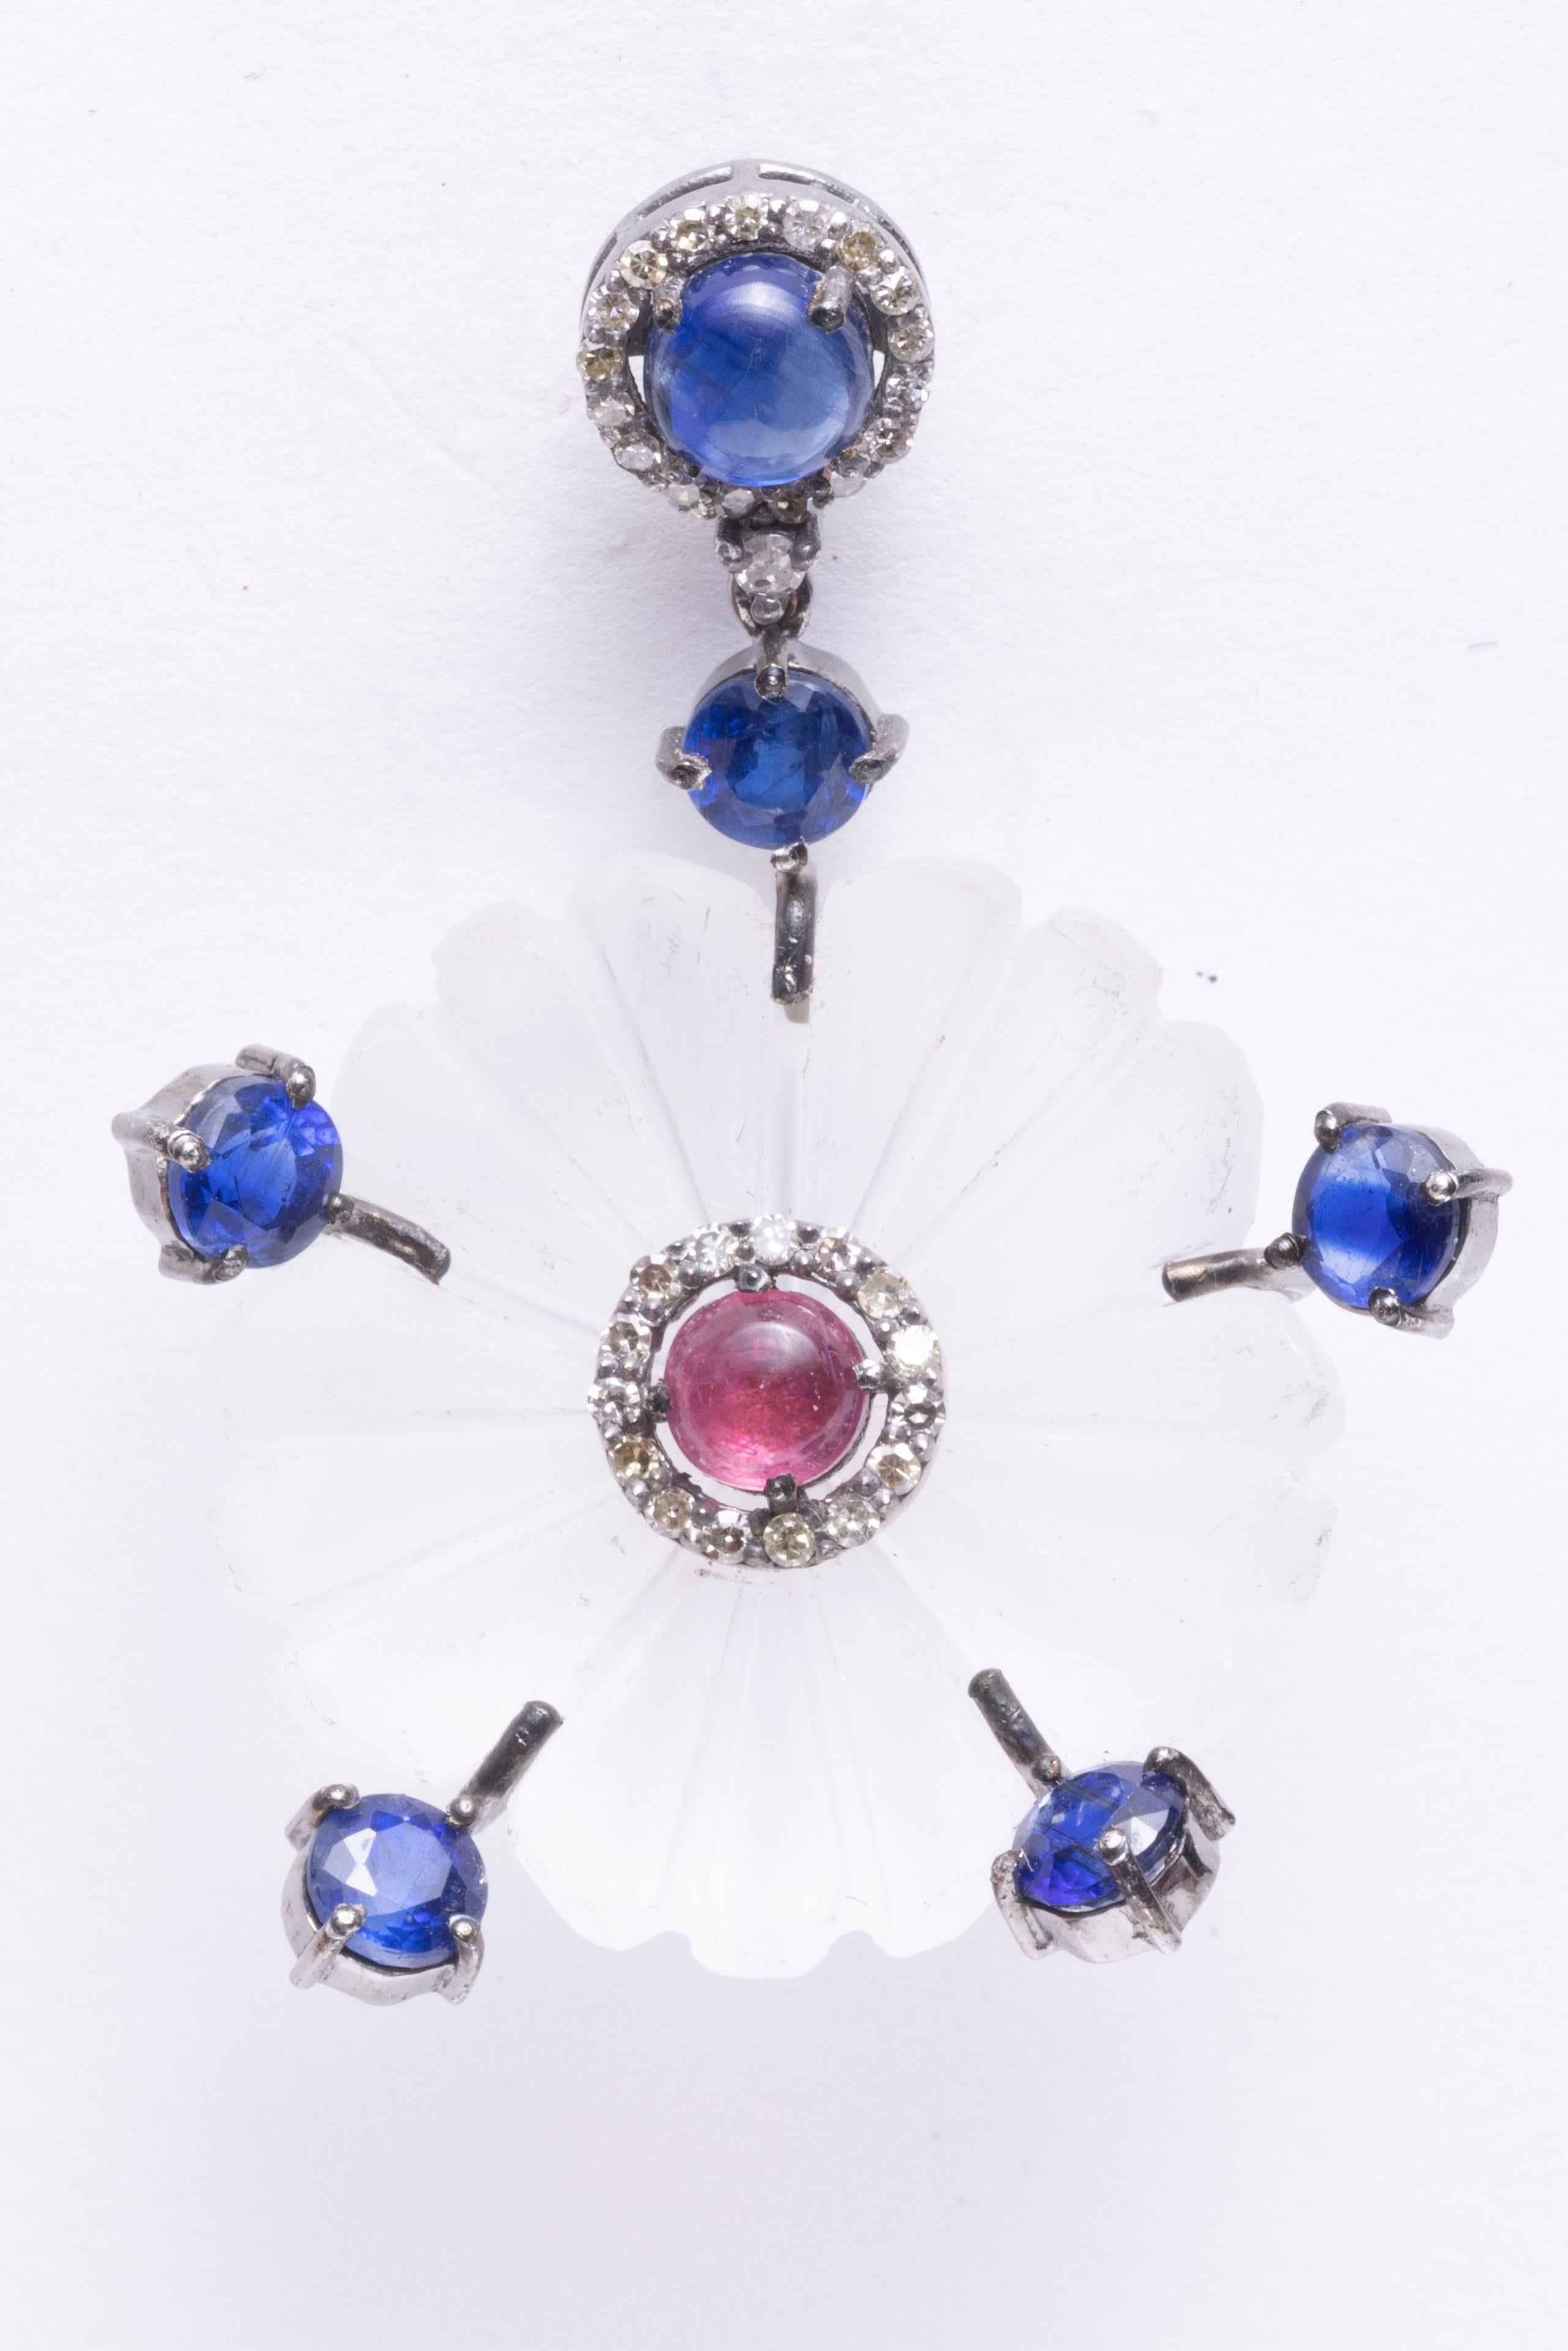 An unusual pair of carved crystal earrings in a floral motif.  Features a cabochon pink tourmaline center bordered with round, faceted diamonds.  Blue kyanite stones radiate out to the edges and also on the post which is again bordered with